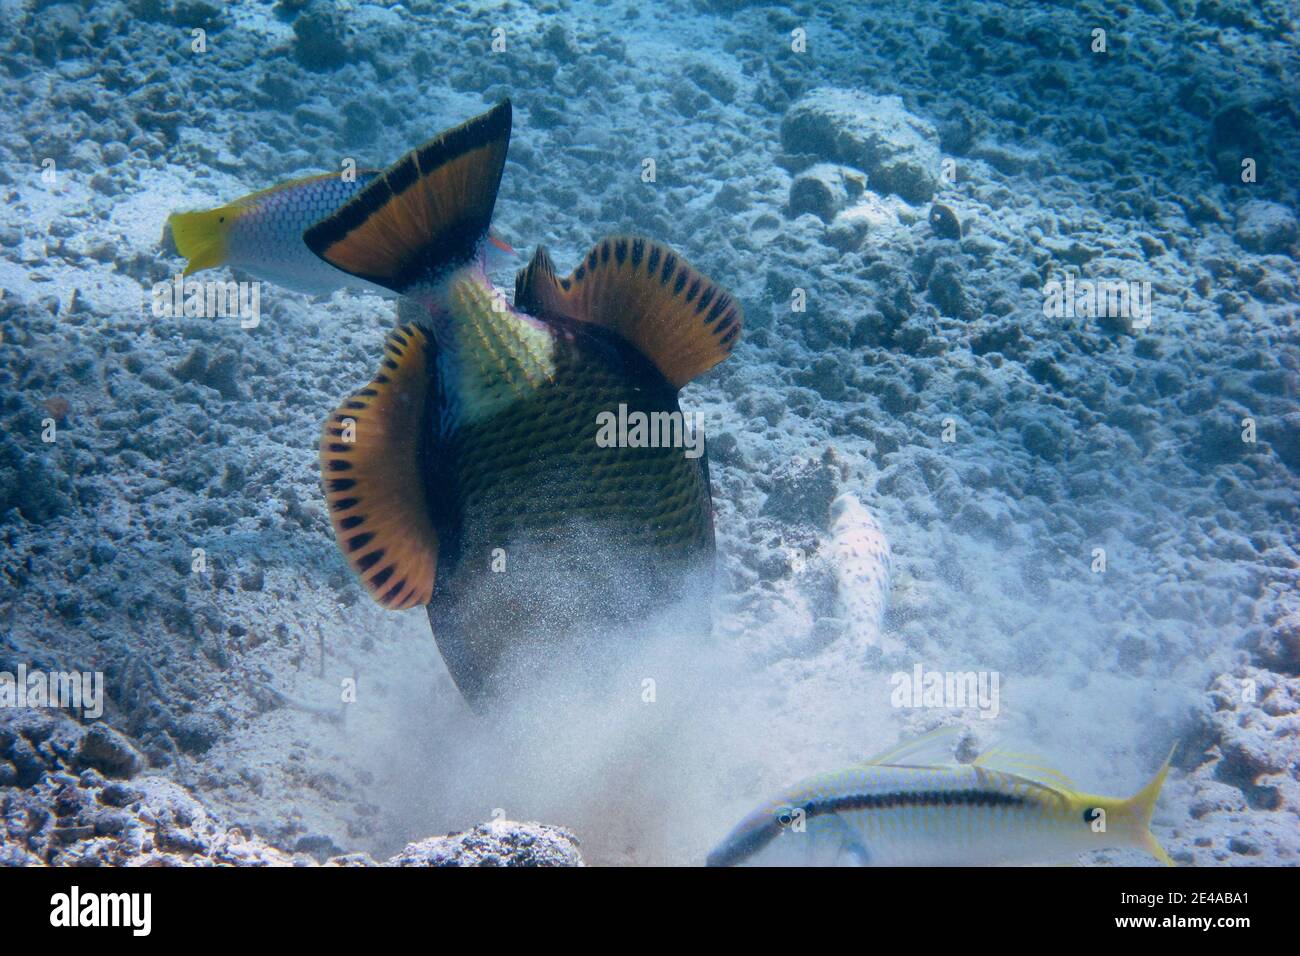 big green giant triggerfish digs in sandy seabed Stock Photo